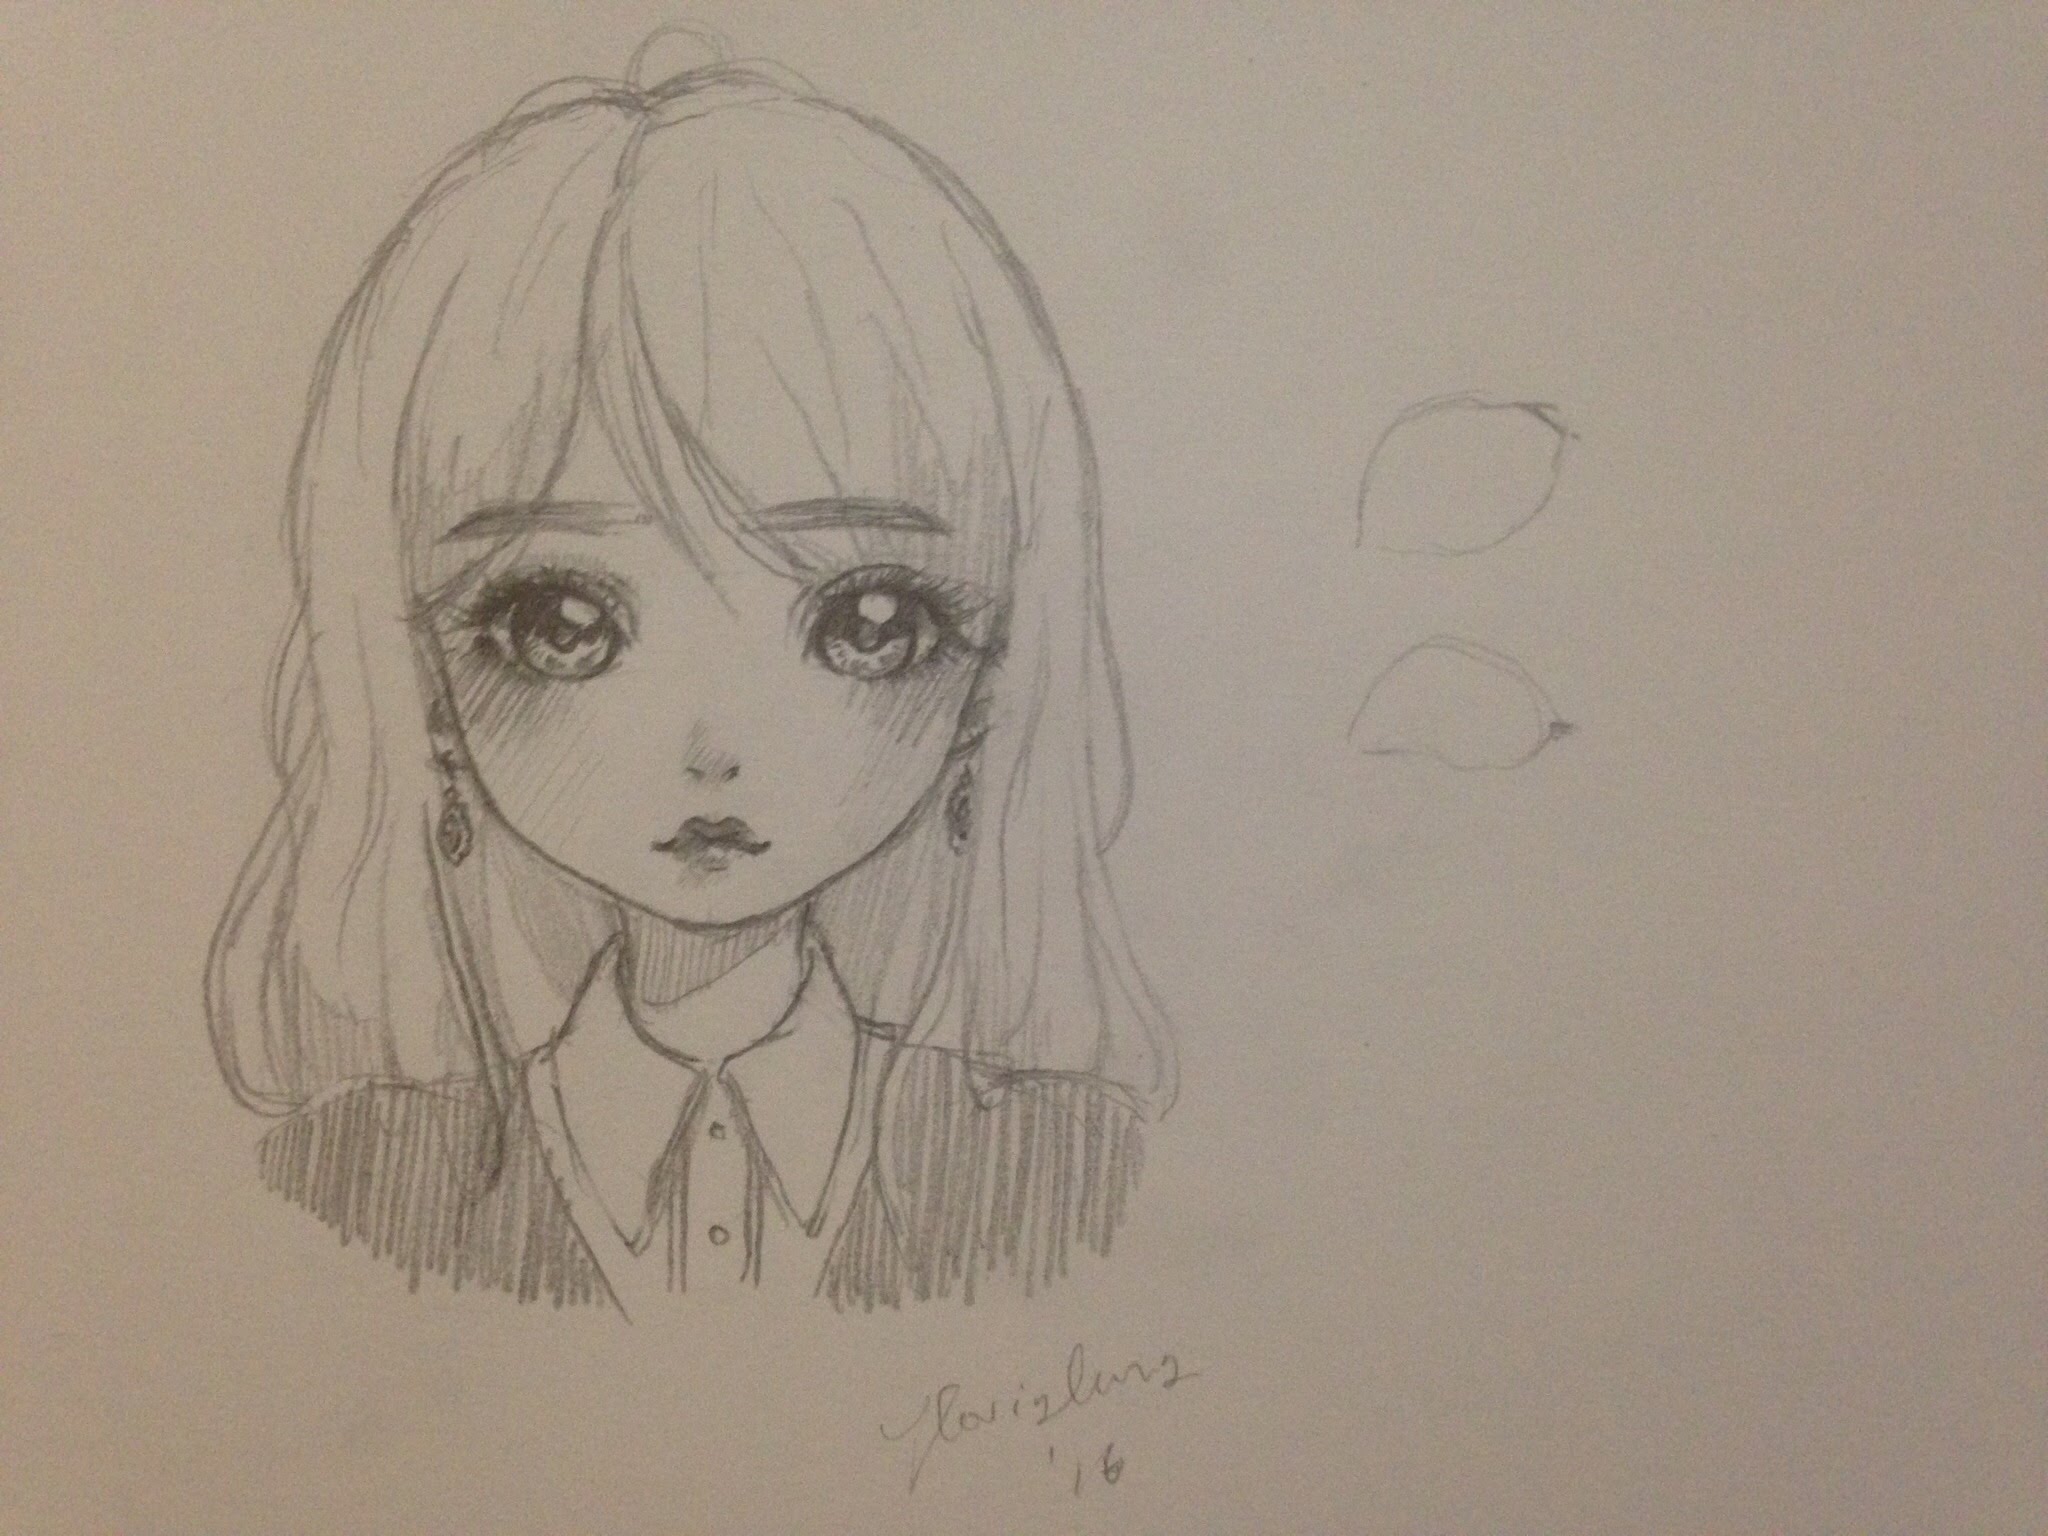 Anime Doll Drawing at GetDrawings.com | Free for personal ...